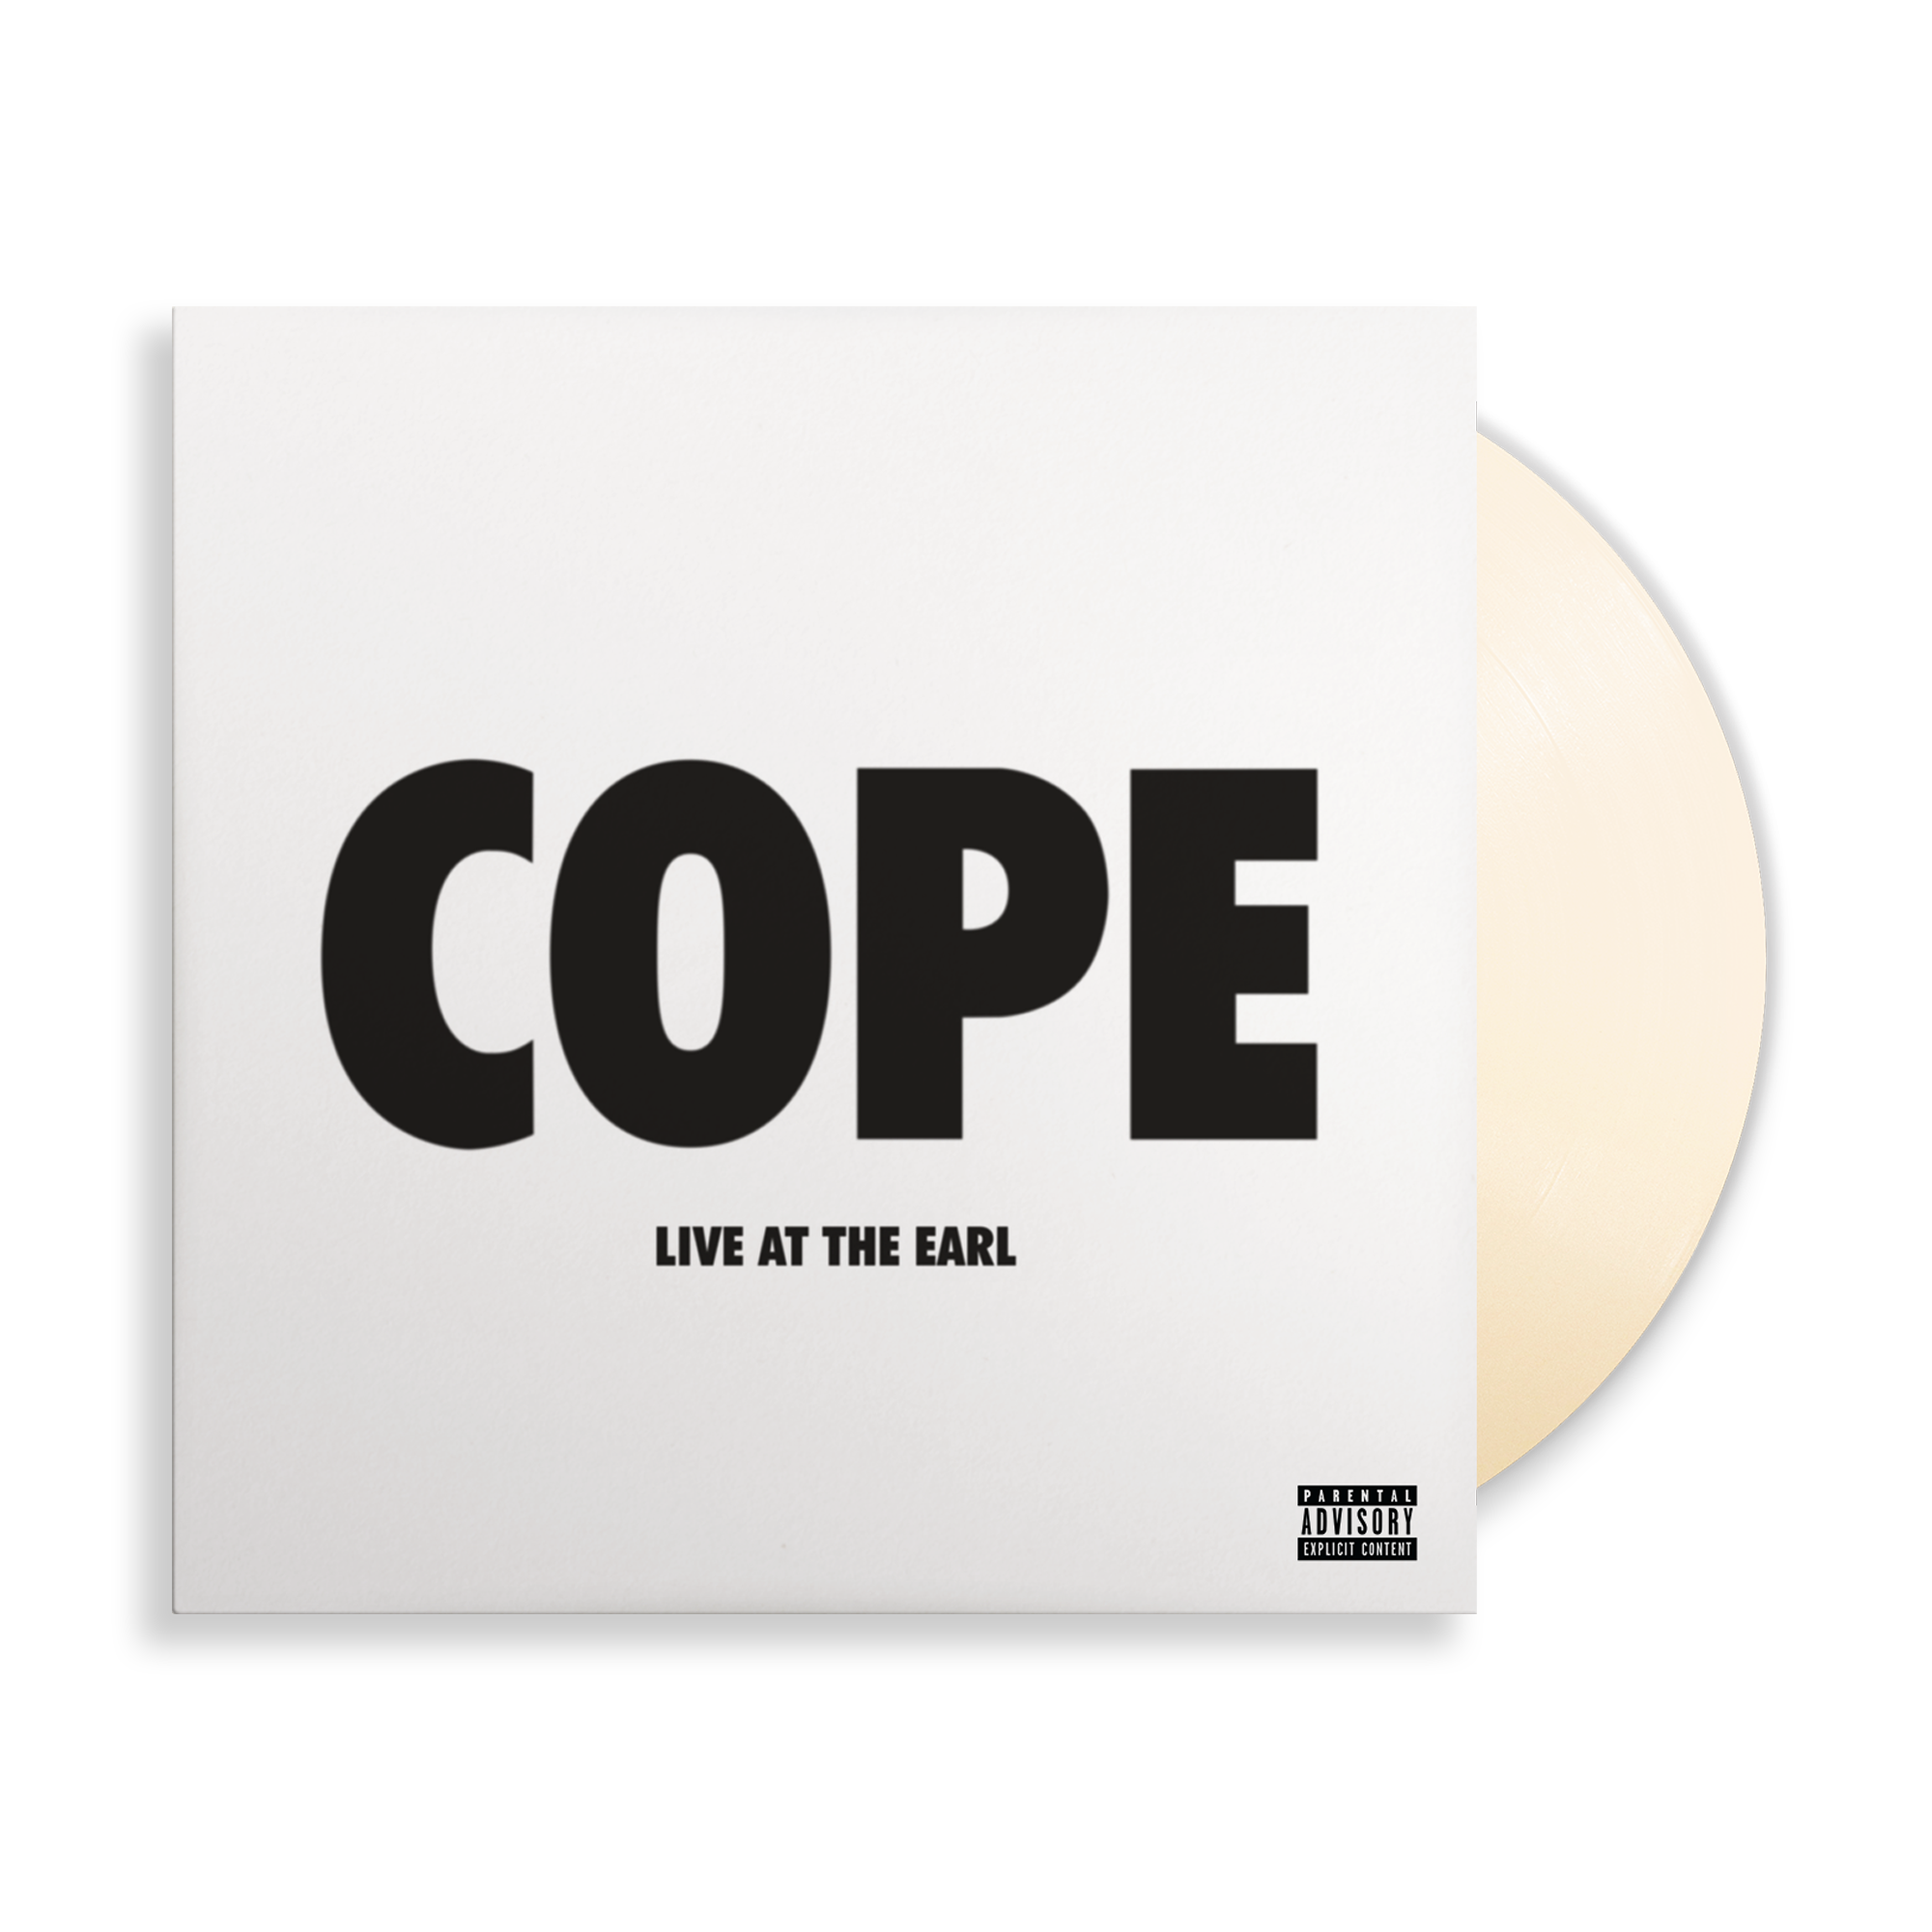 COPE - Live at The Earl: Limited 'Bone' Vinyl LP + Exclusive Print